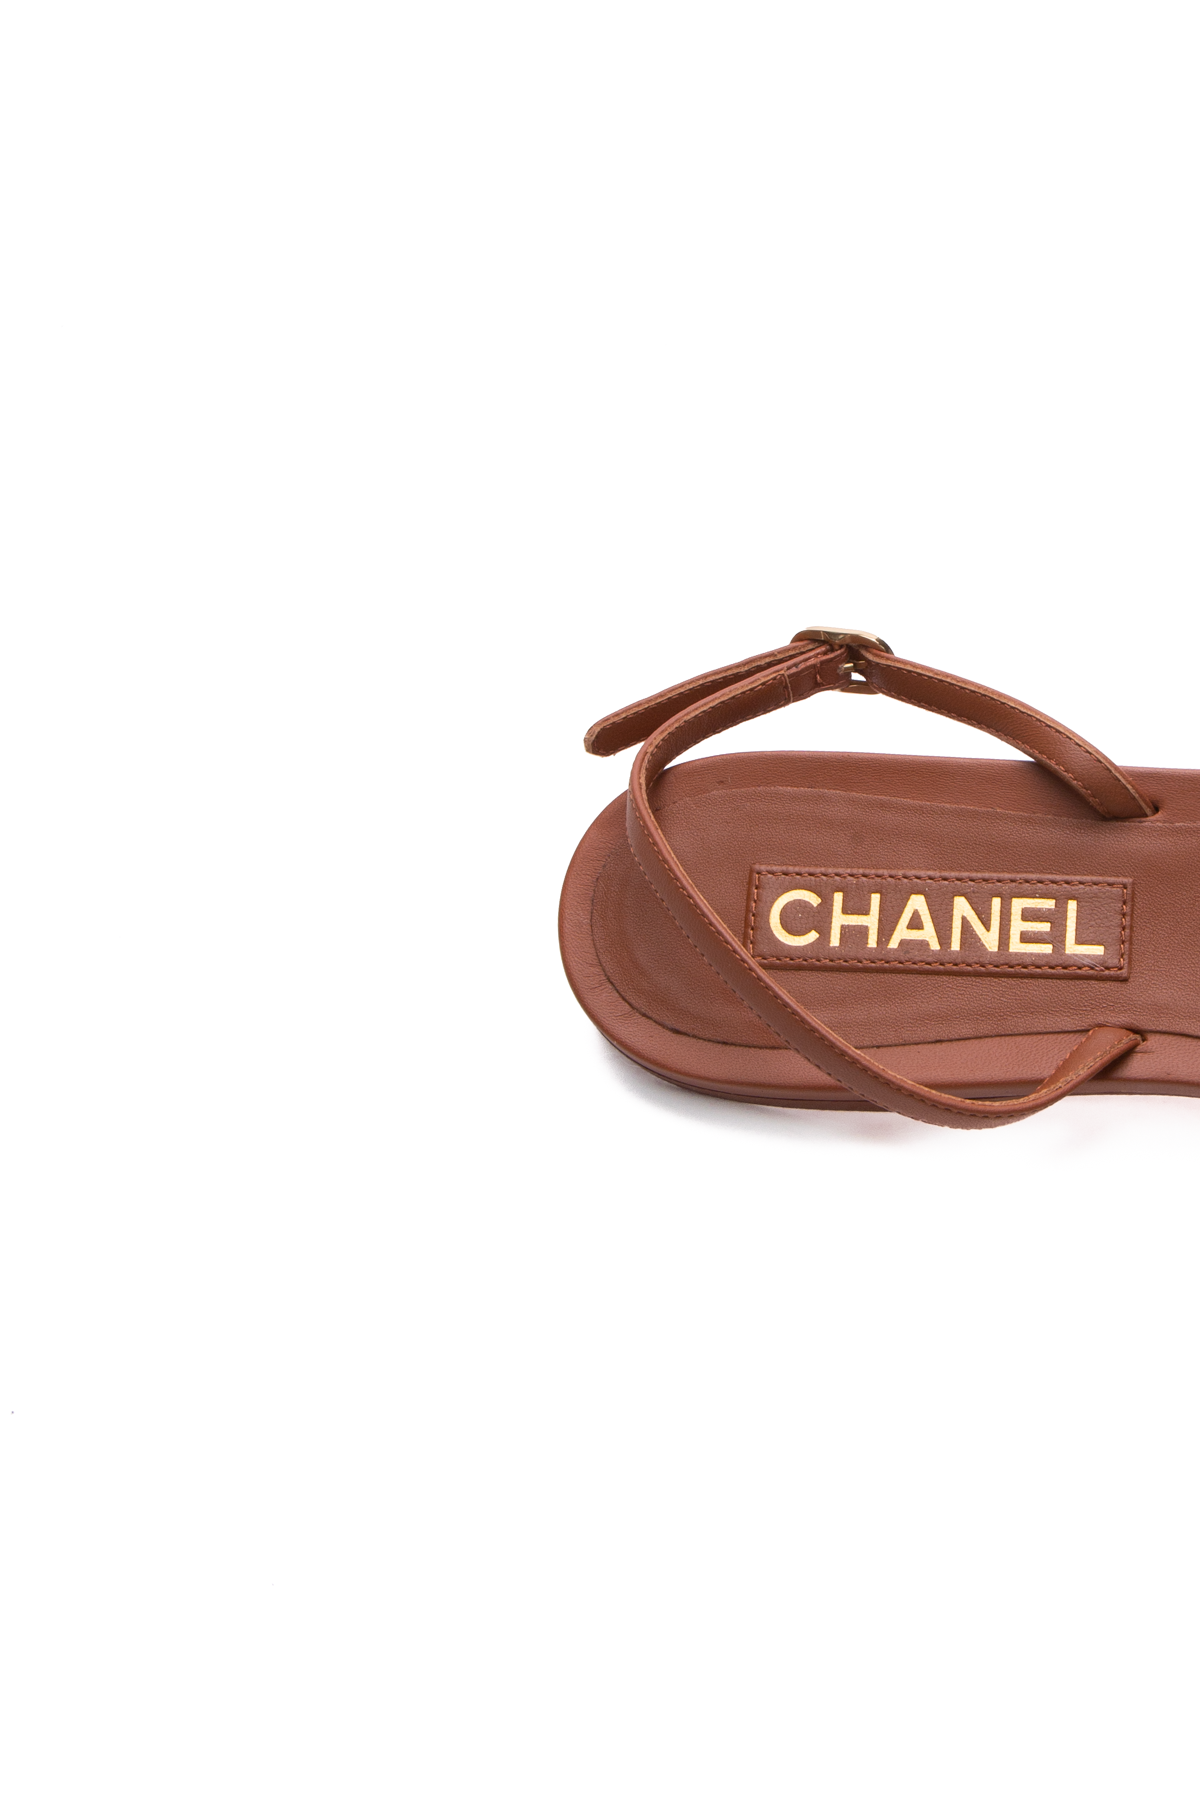 Chanel CC Thong Sandals - Size 42 - Couture USA